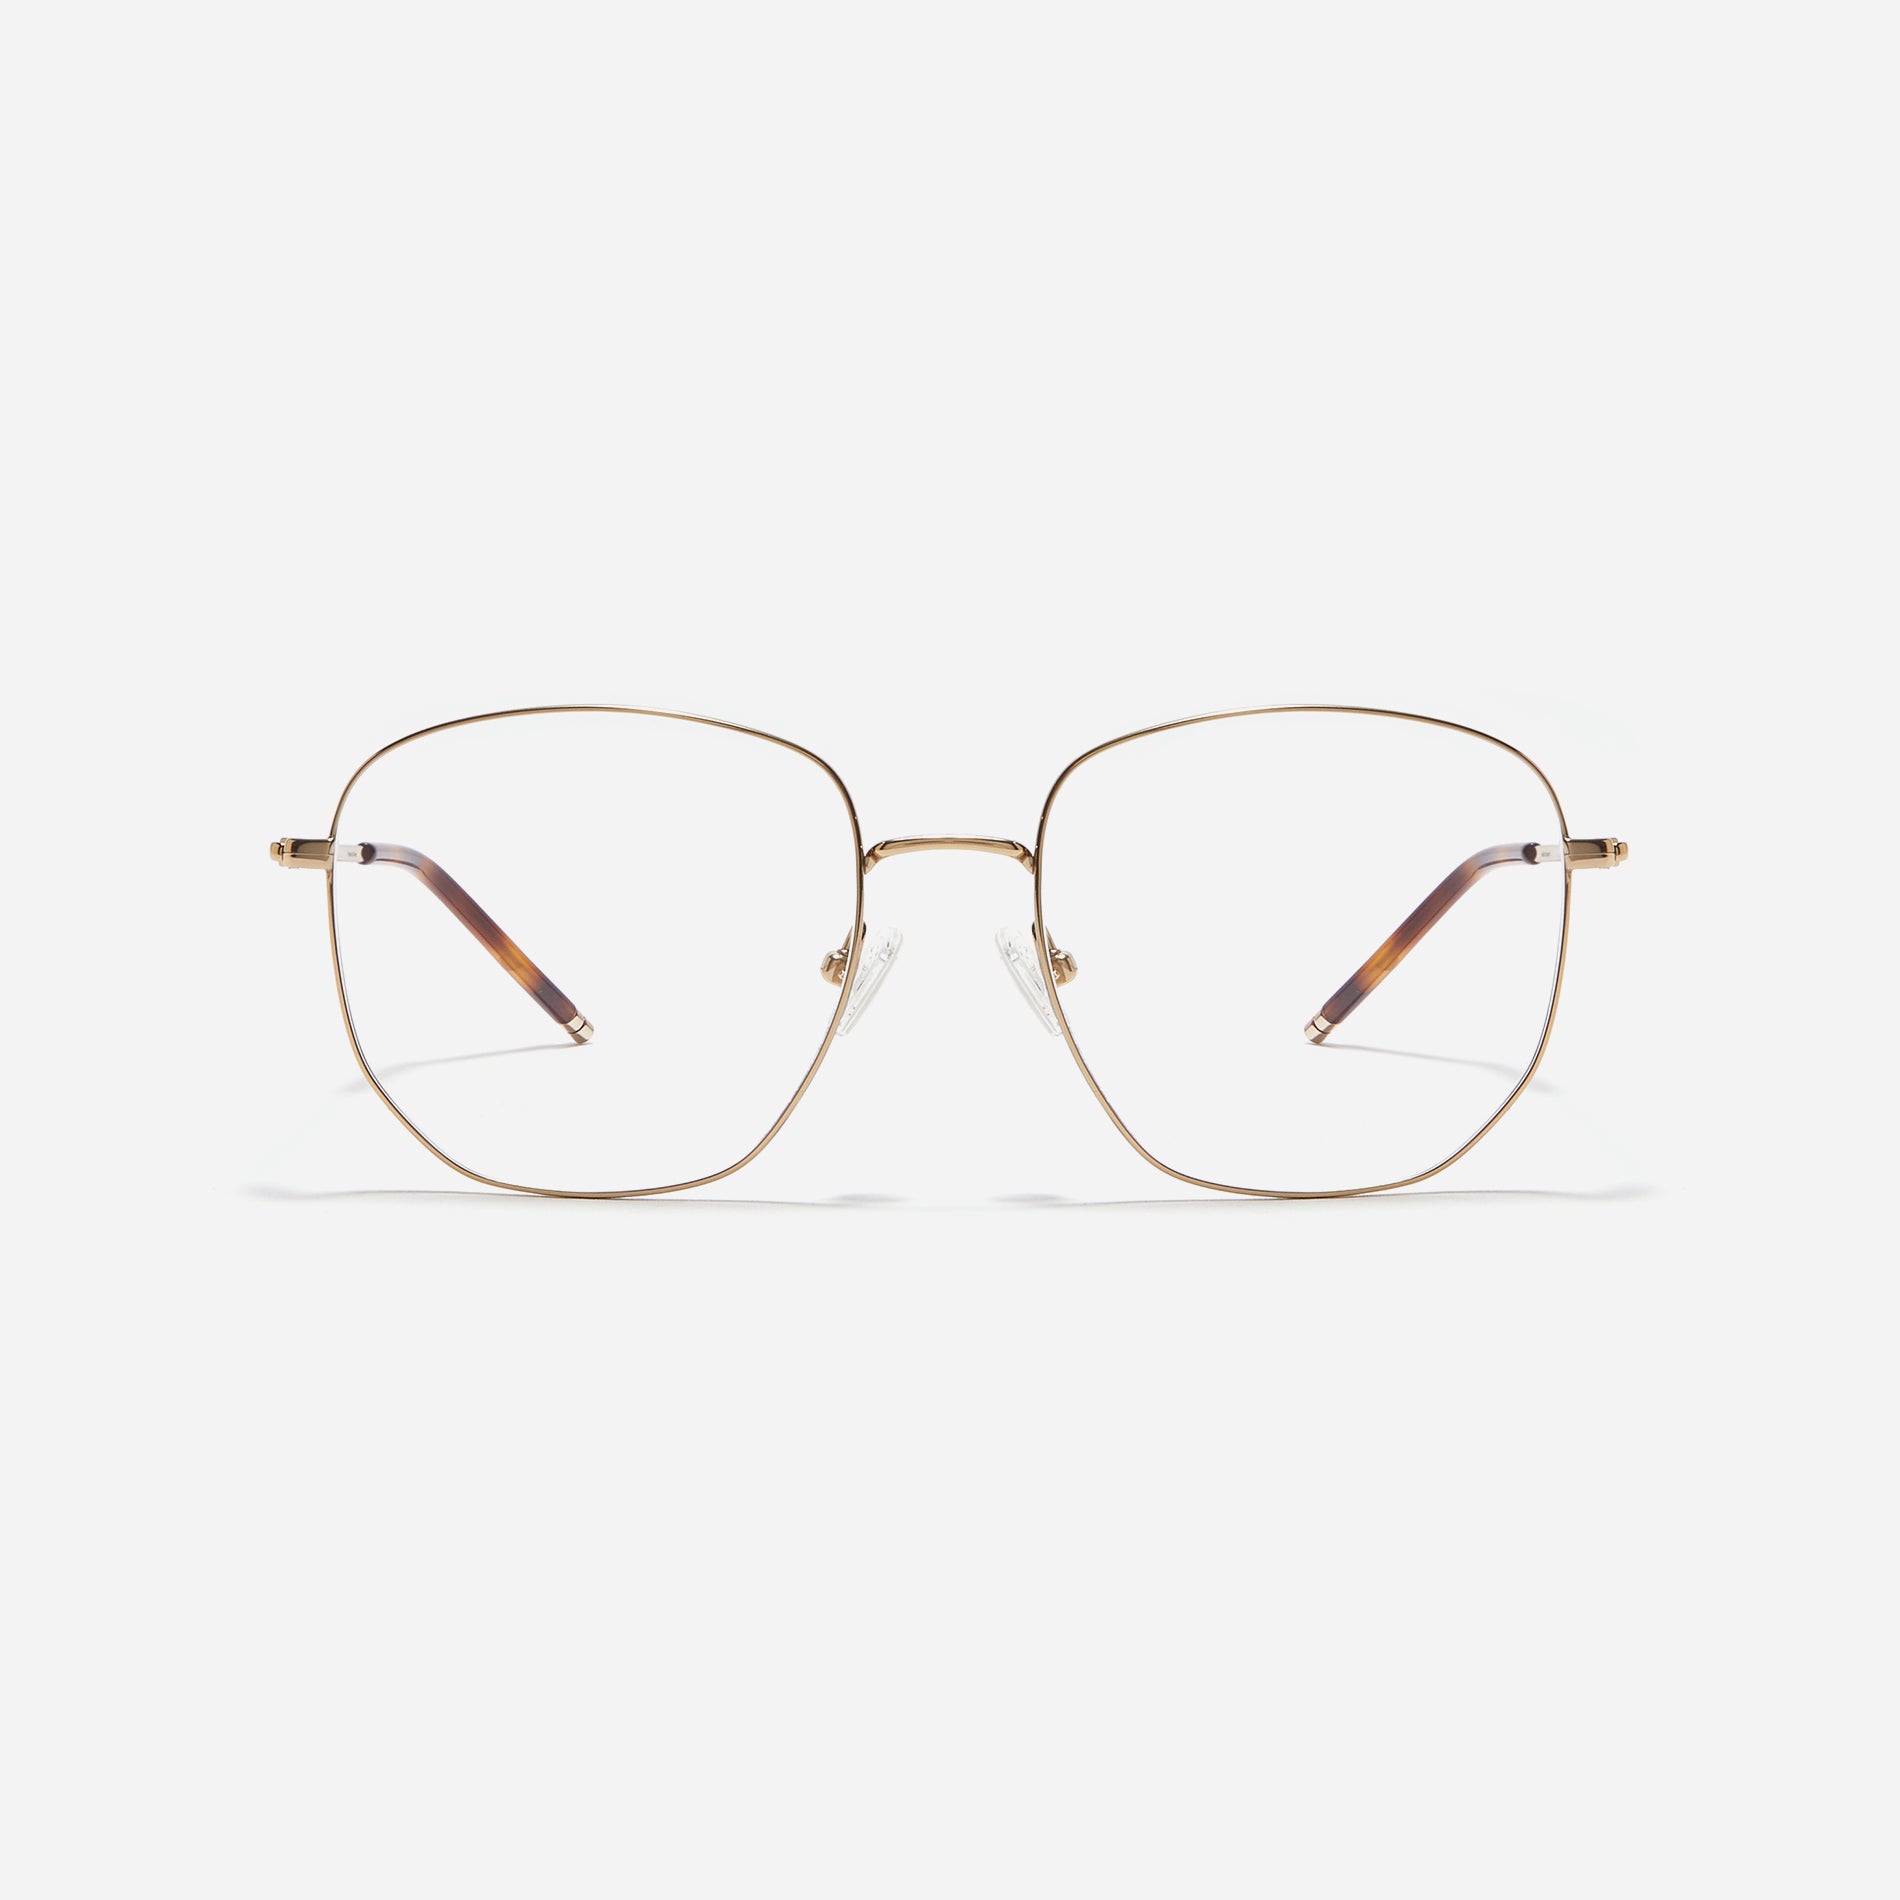 Square-shaped Boeing-style oversized eyeglasses crafted entirely from titanium for a lighter and more comfortable fit. With classic color options and frame design, these eyeglasses offer a retro style that effortlessly complements one's look.